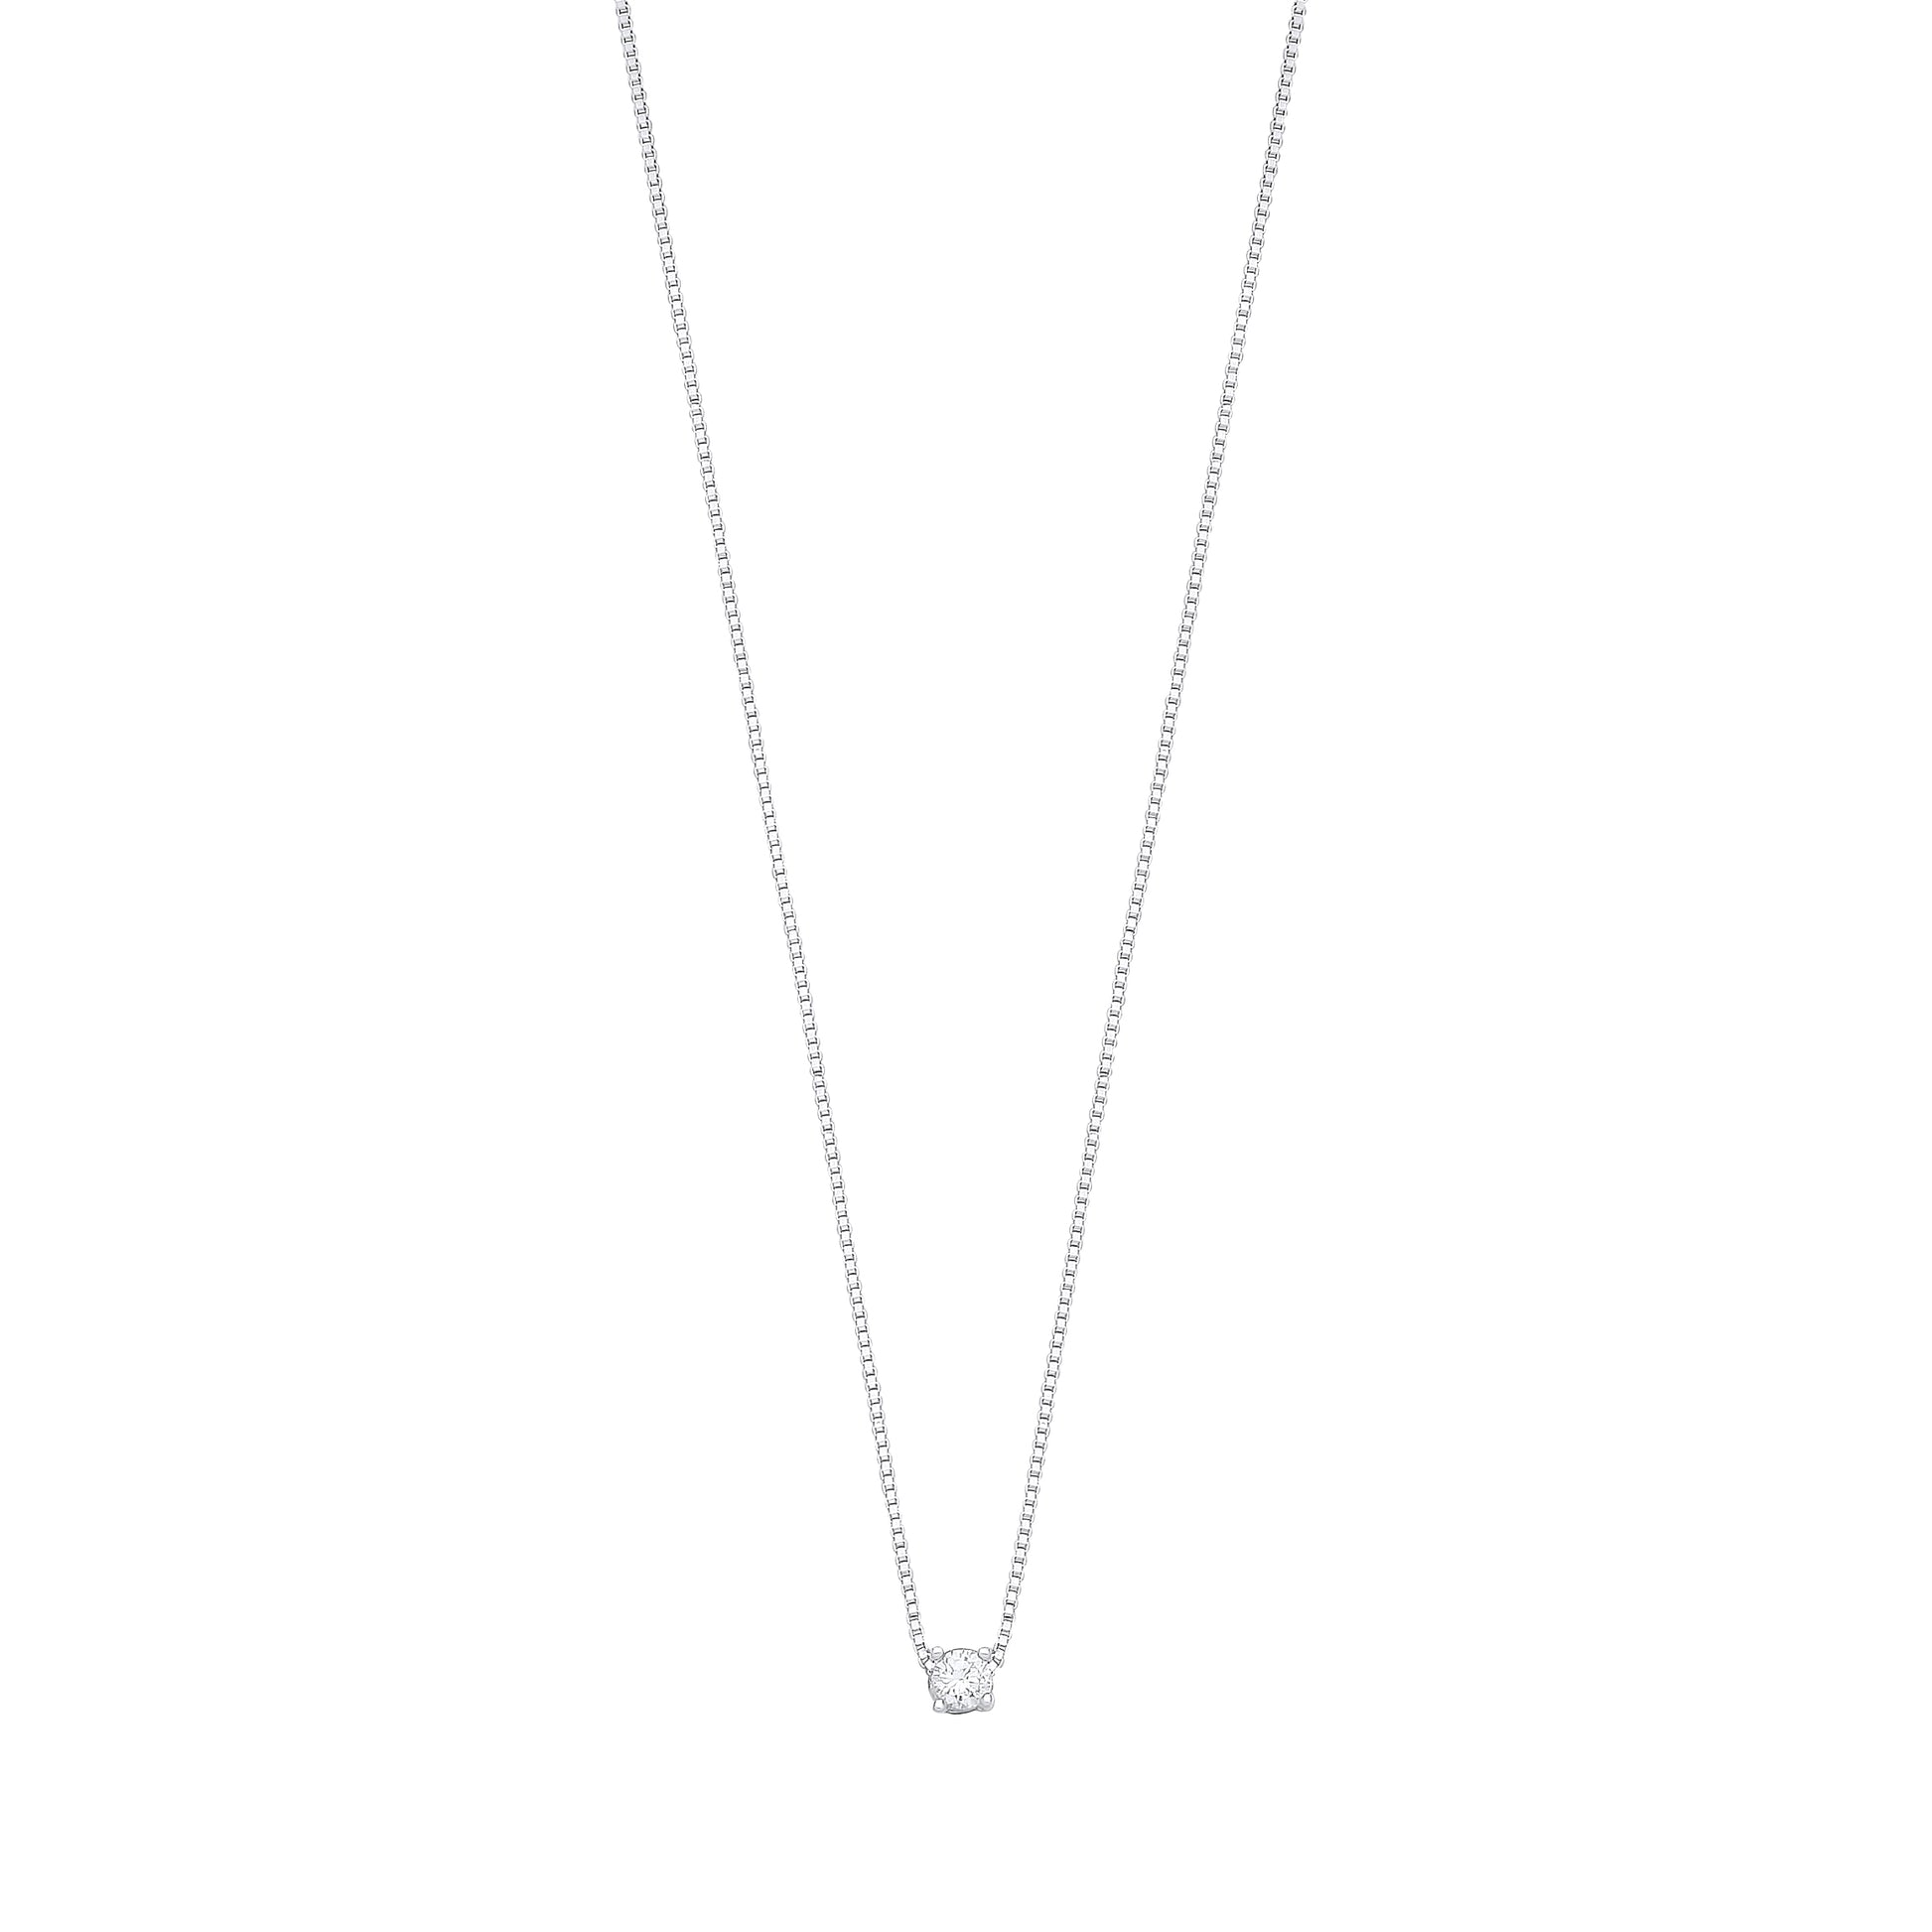 Silver  4 Claw Dainty Solitaire Necklace - GVK393